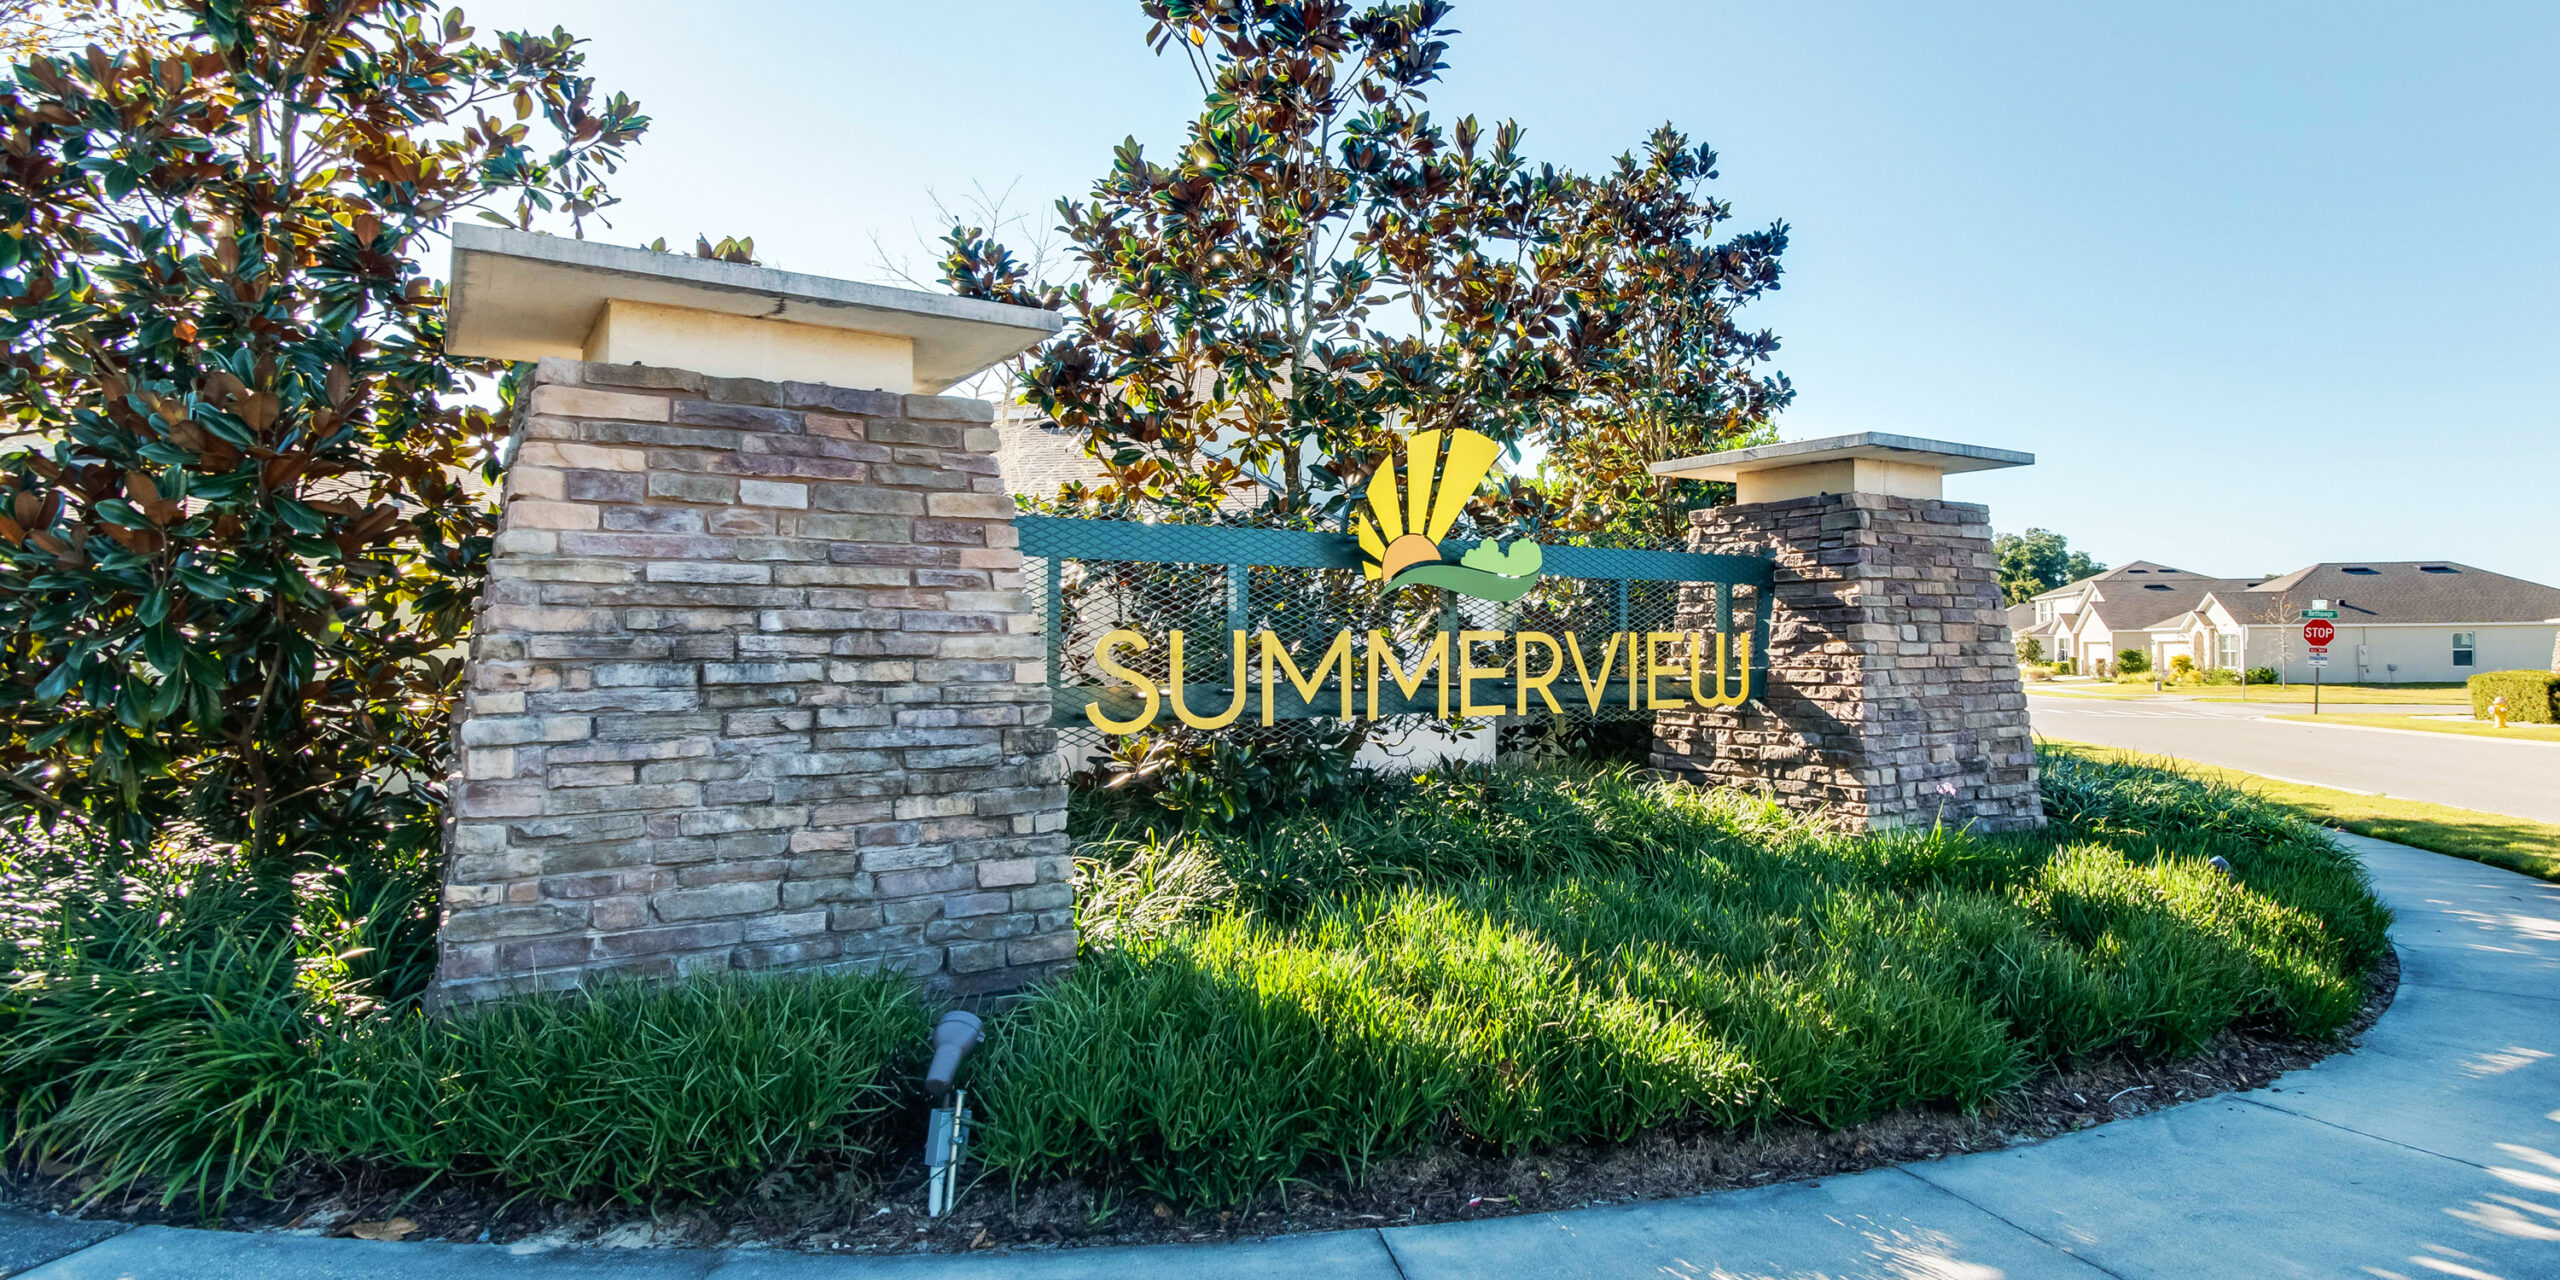 The entrance sign to the Summerview neighborhood.